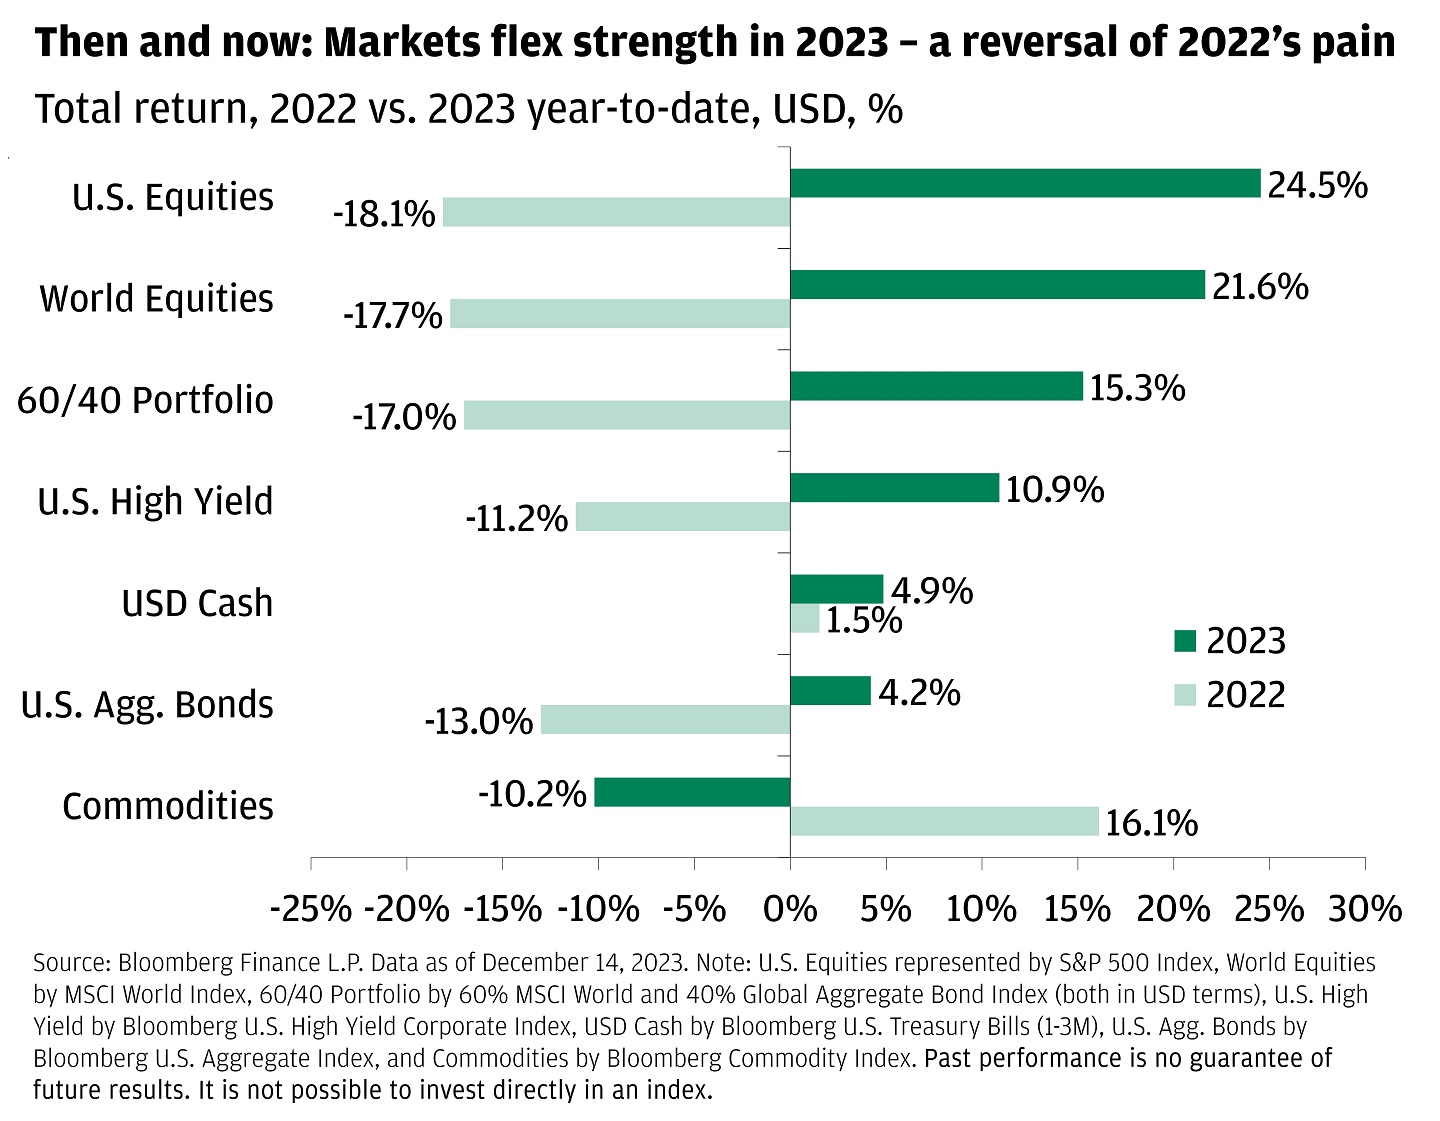 Bar chart showing returns in 2022 and 2023 year-to-date, across asset classes.